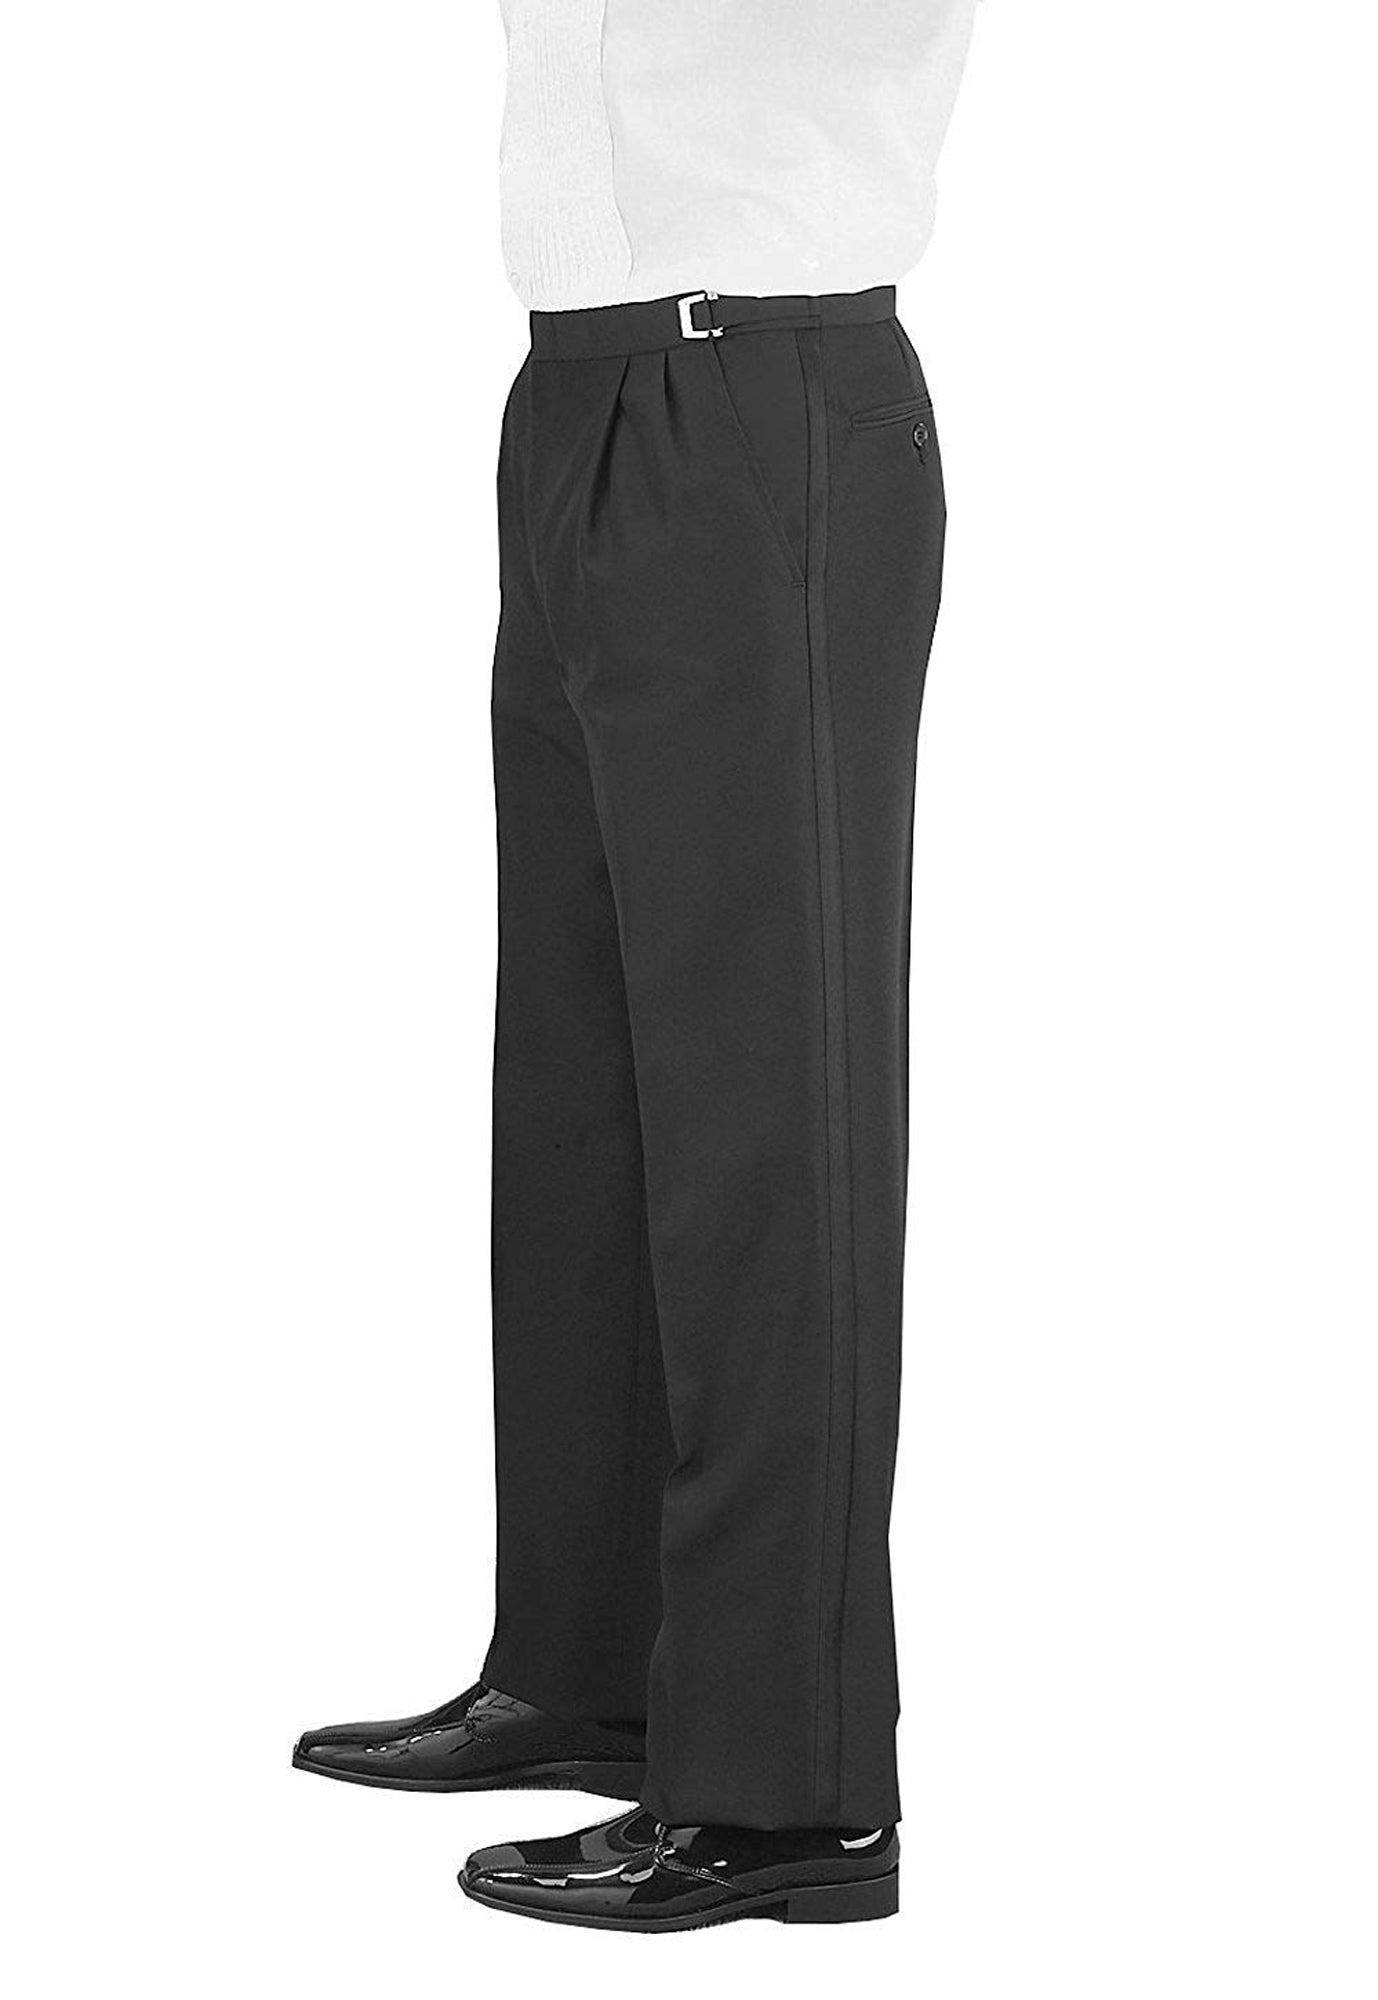 Mens Flat Front Modern Fit Tuxedo Pant in Black